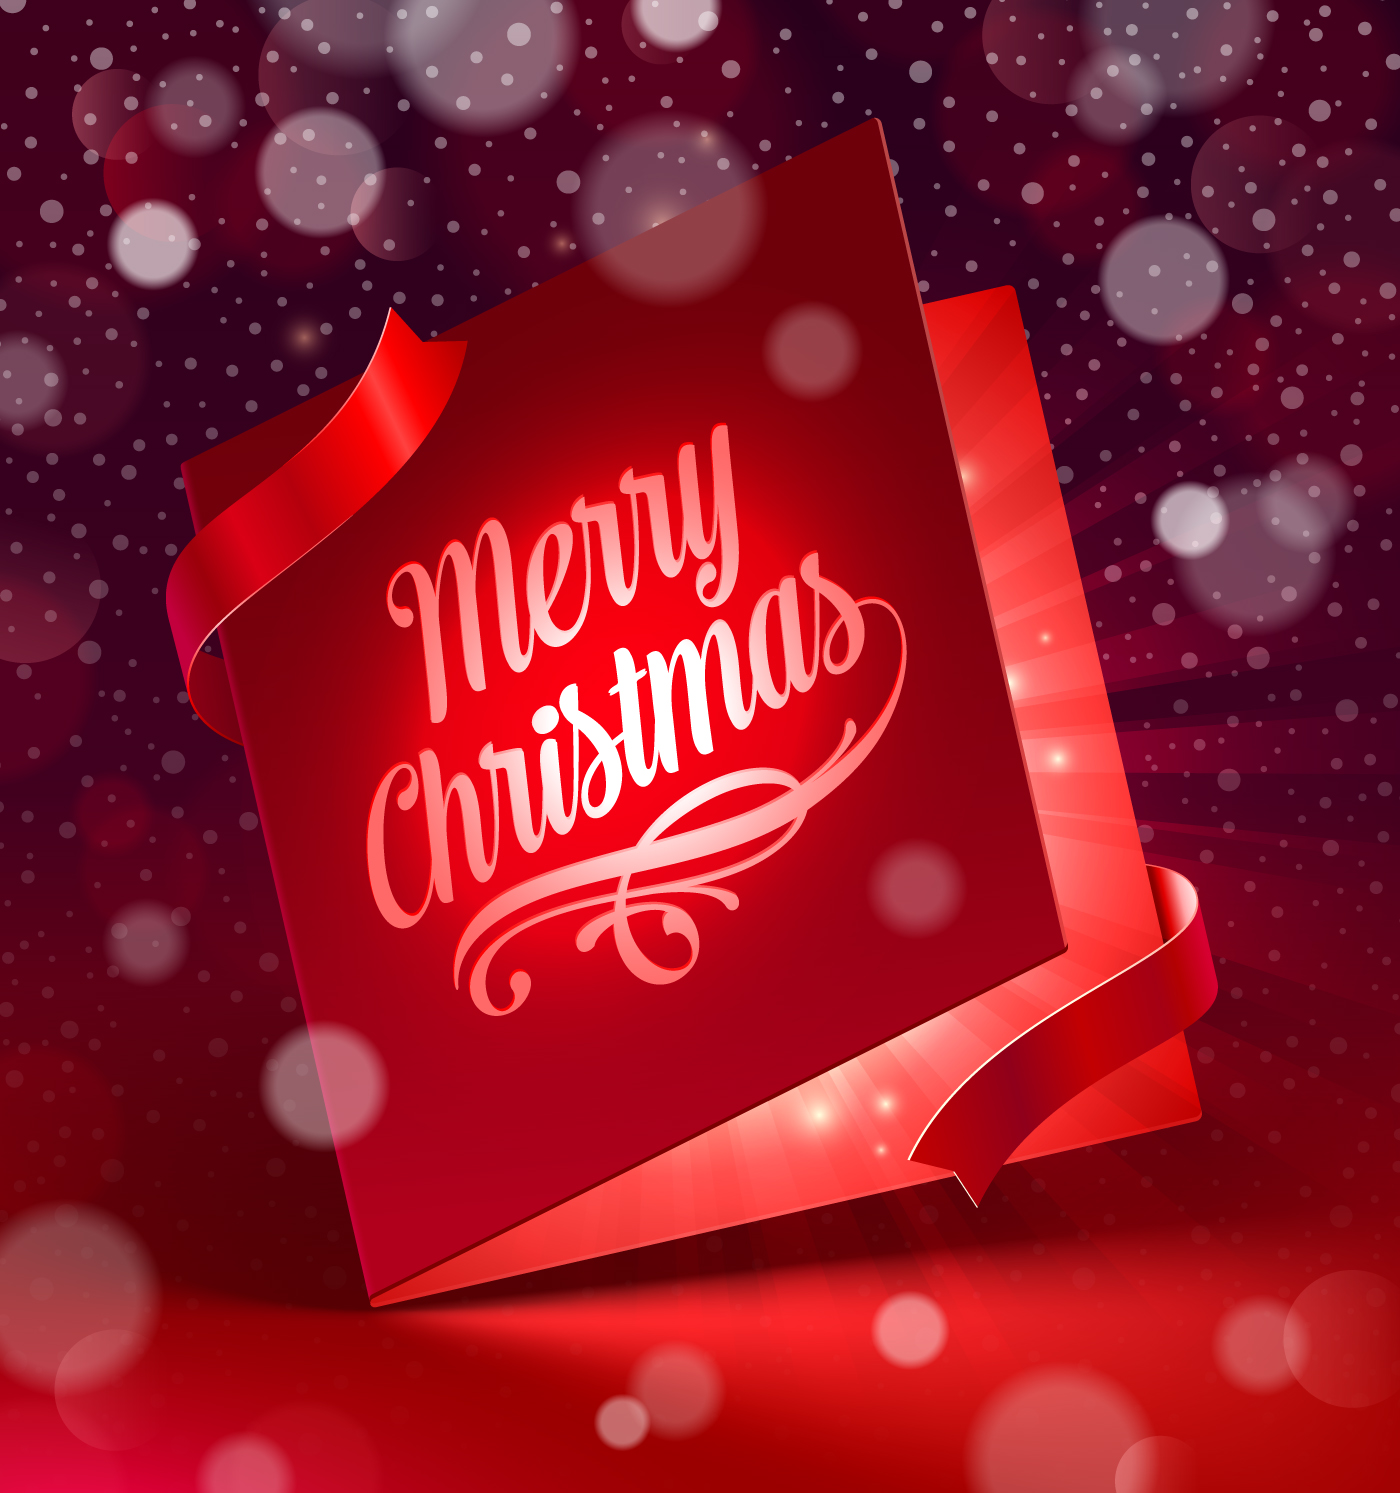 Christmas with 2014 New Year Creative background set 06 xmas new year Creative background creative christmas   